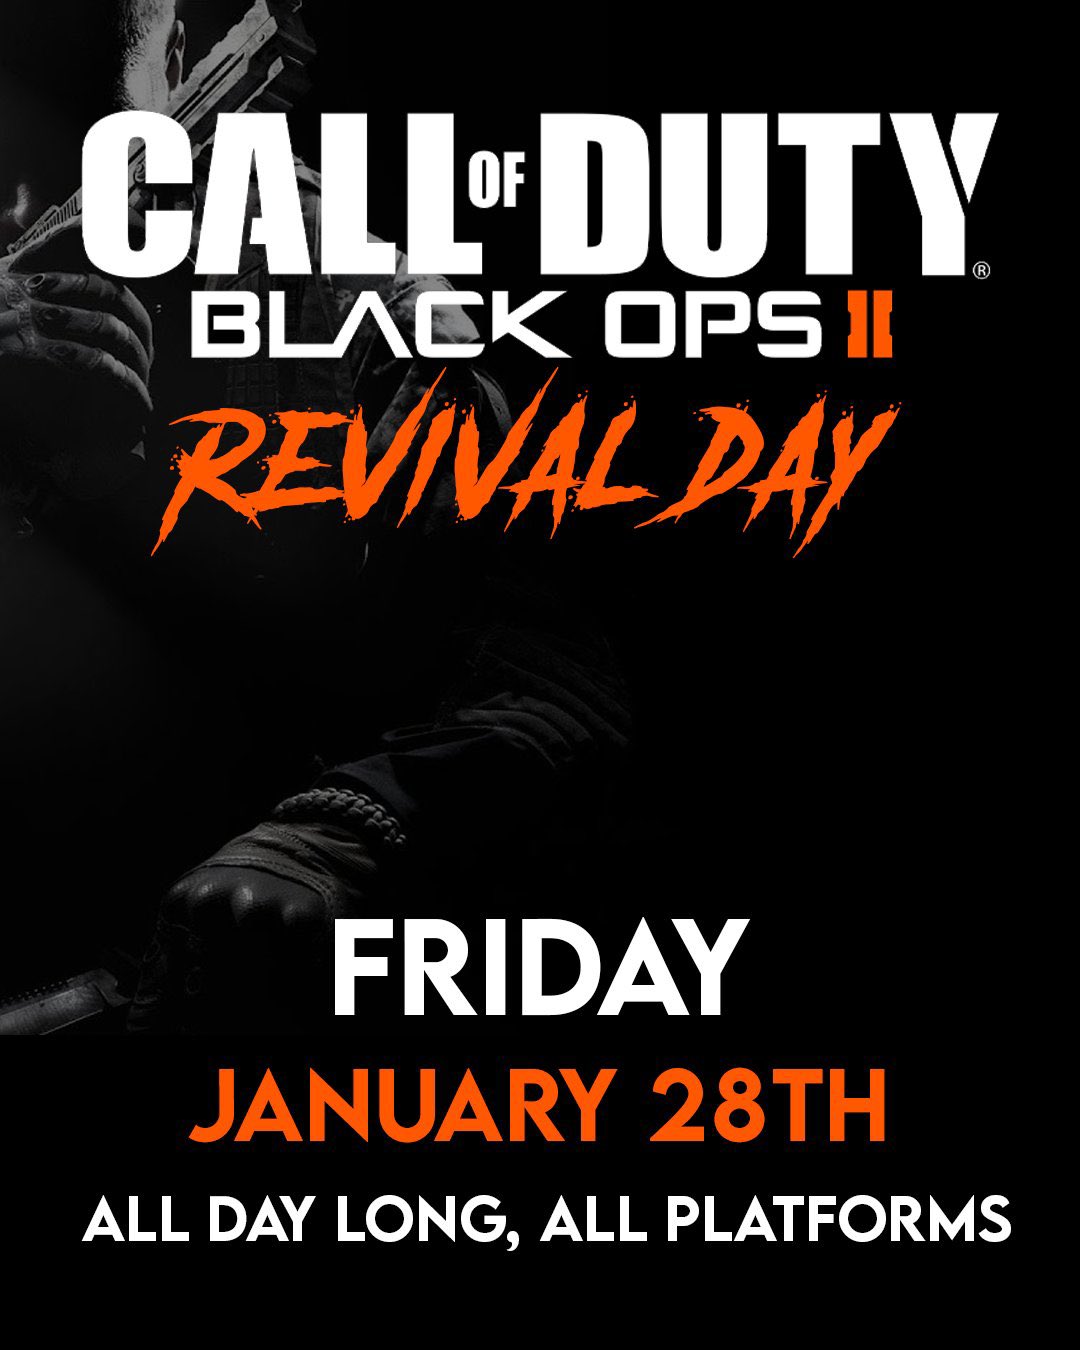 ModernWarzone on Twitter: OPS 2 REVIVAL DAY - January - SAVE THE DATE! 🚨 https://t.co/S6KpsAkQox" / Twitter